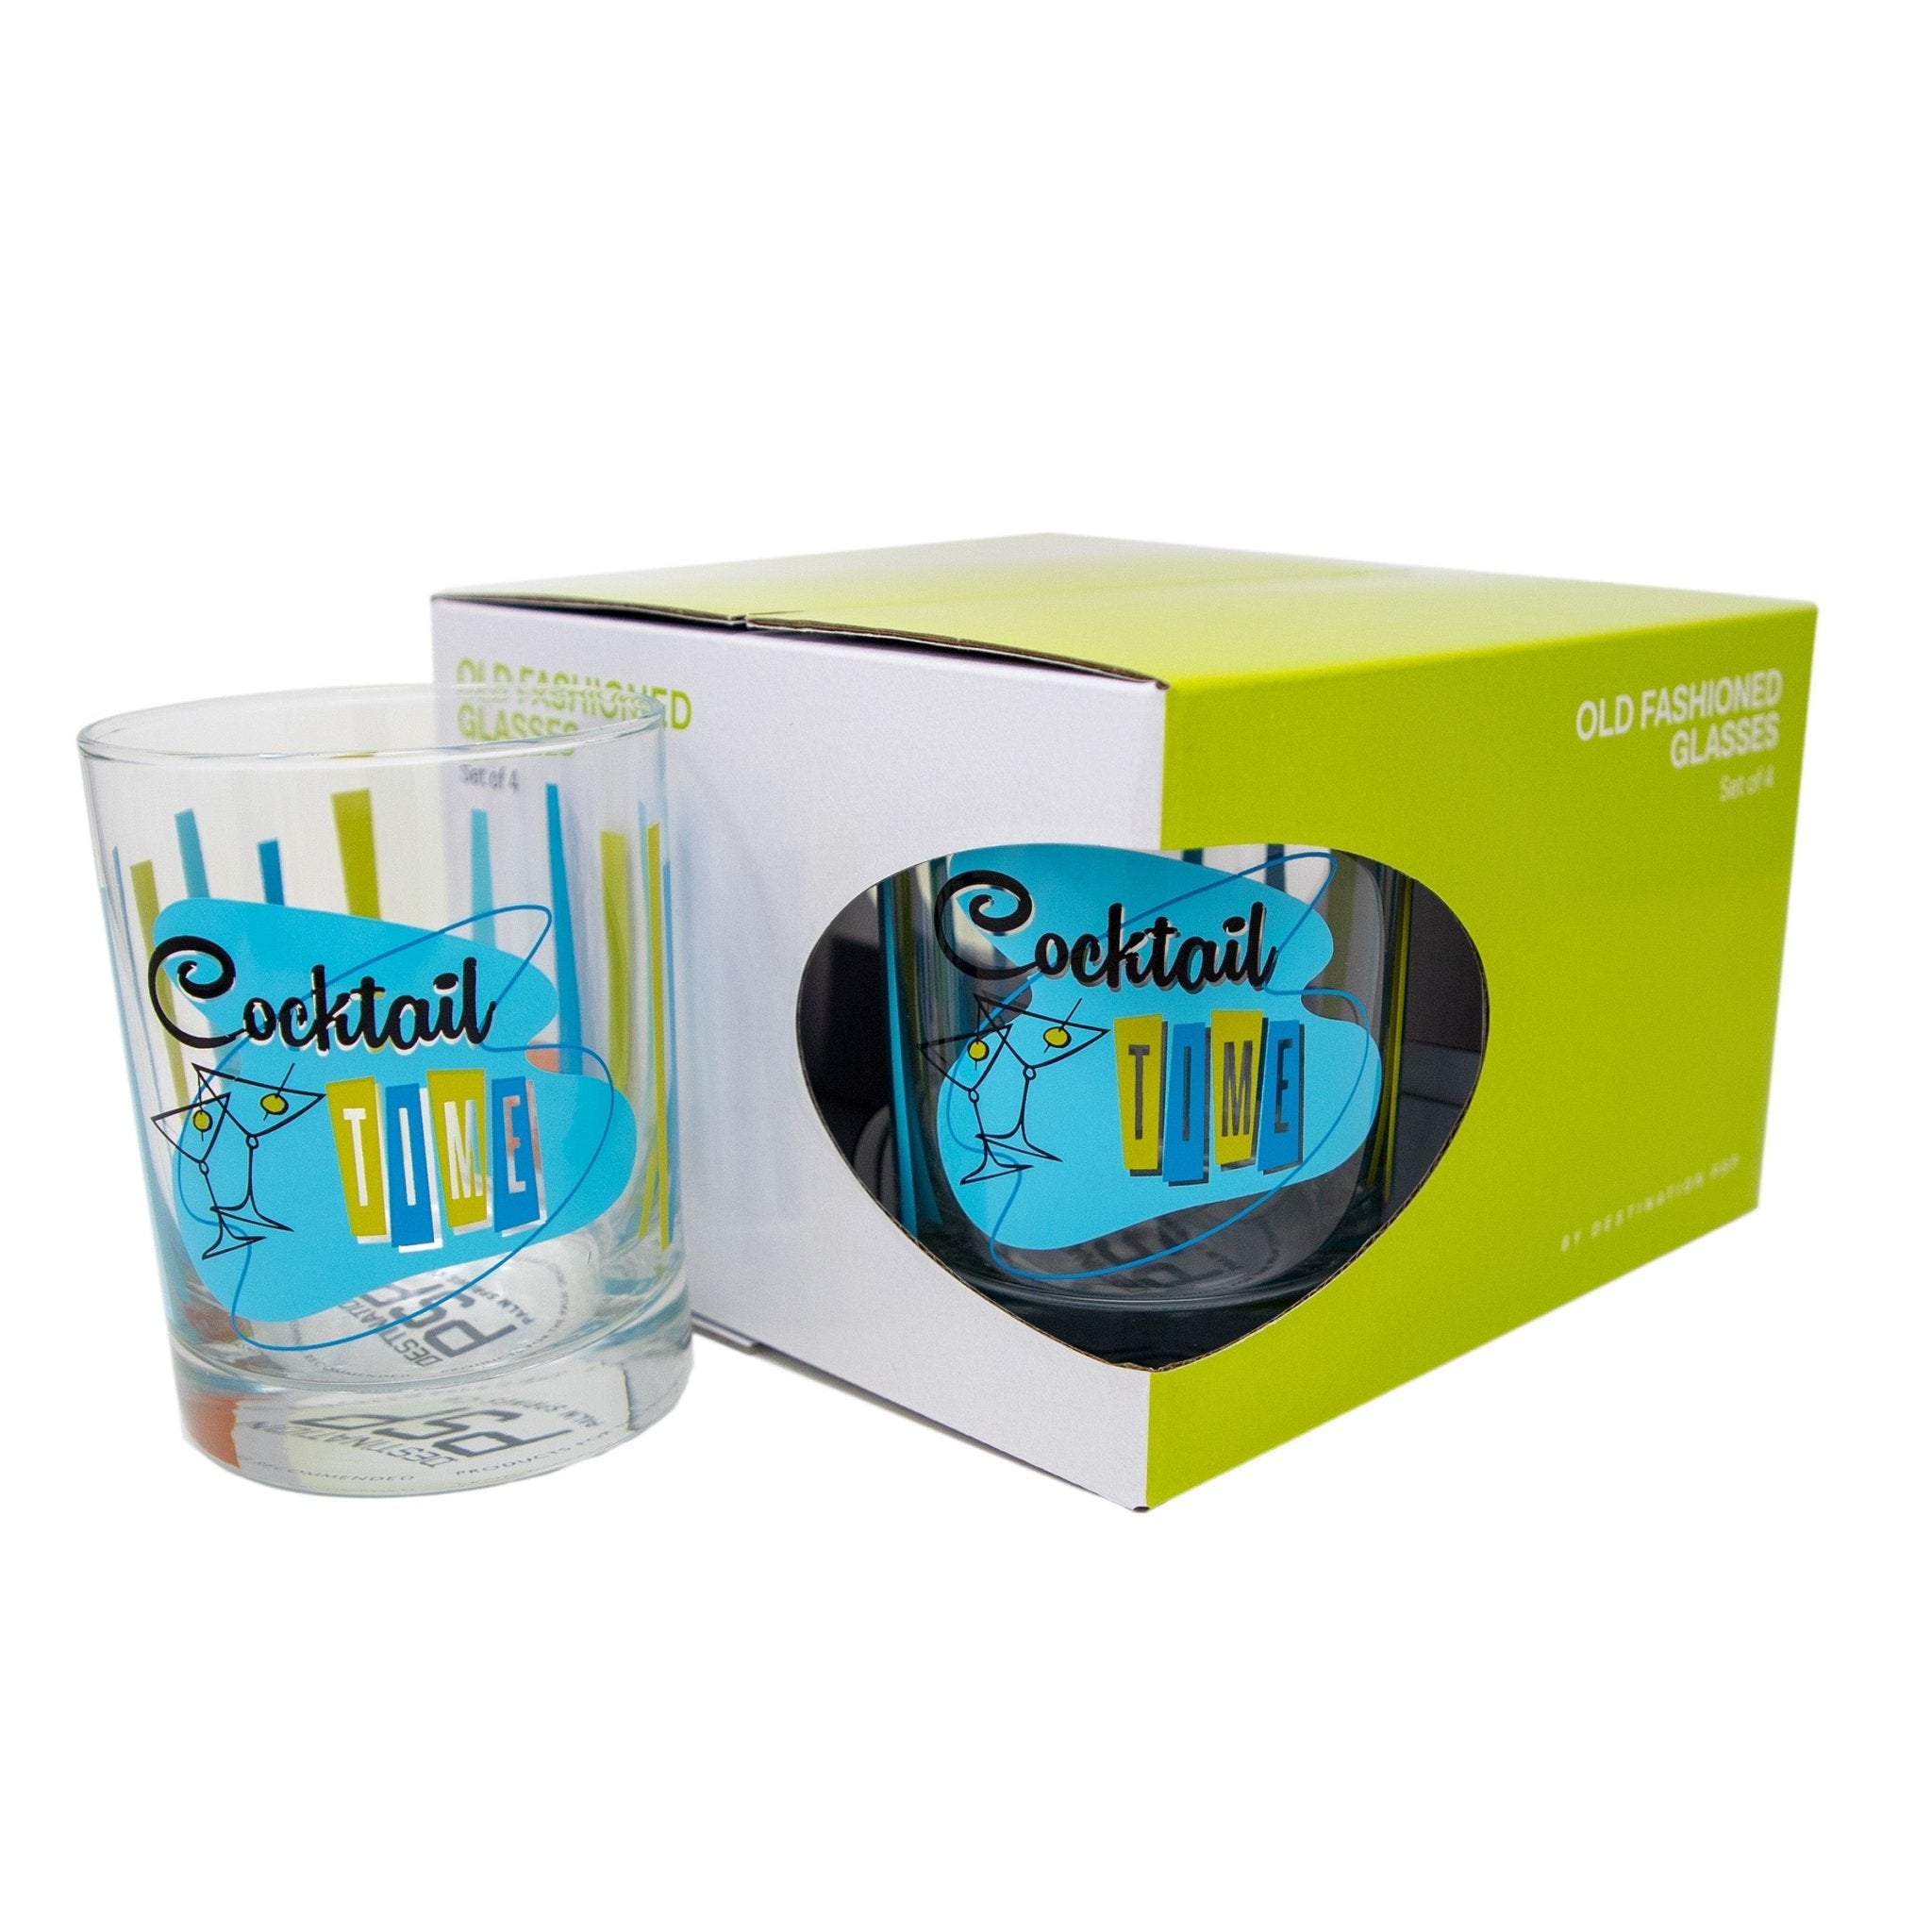 Cocktail Time Old Fashioned Glass Set of 4 - 14 oz Blue Green